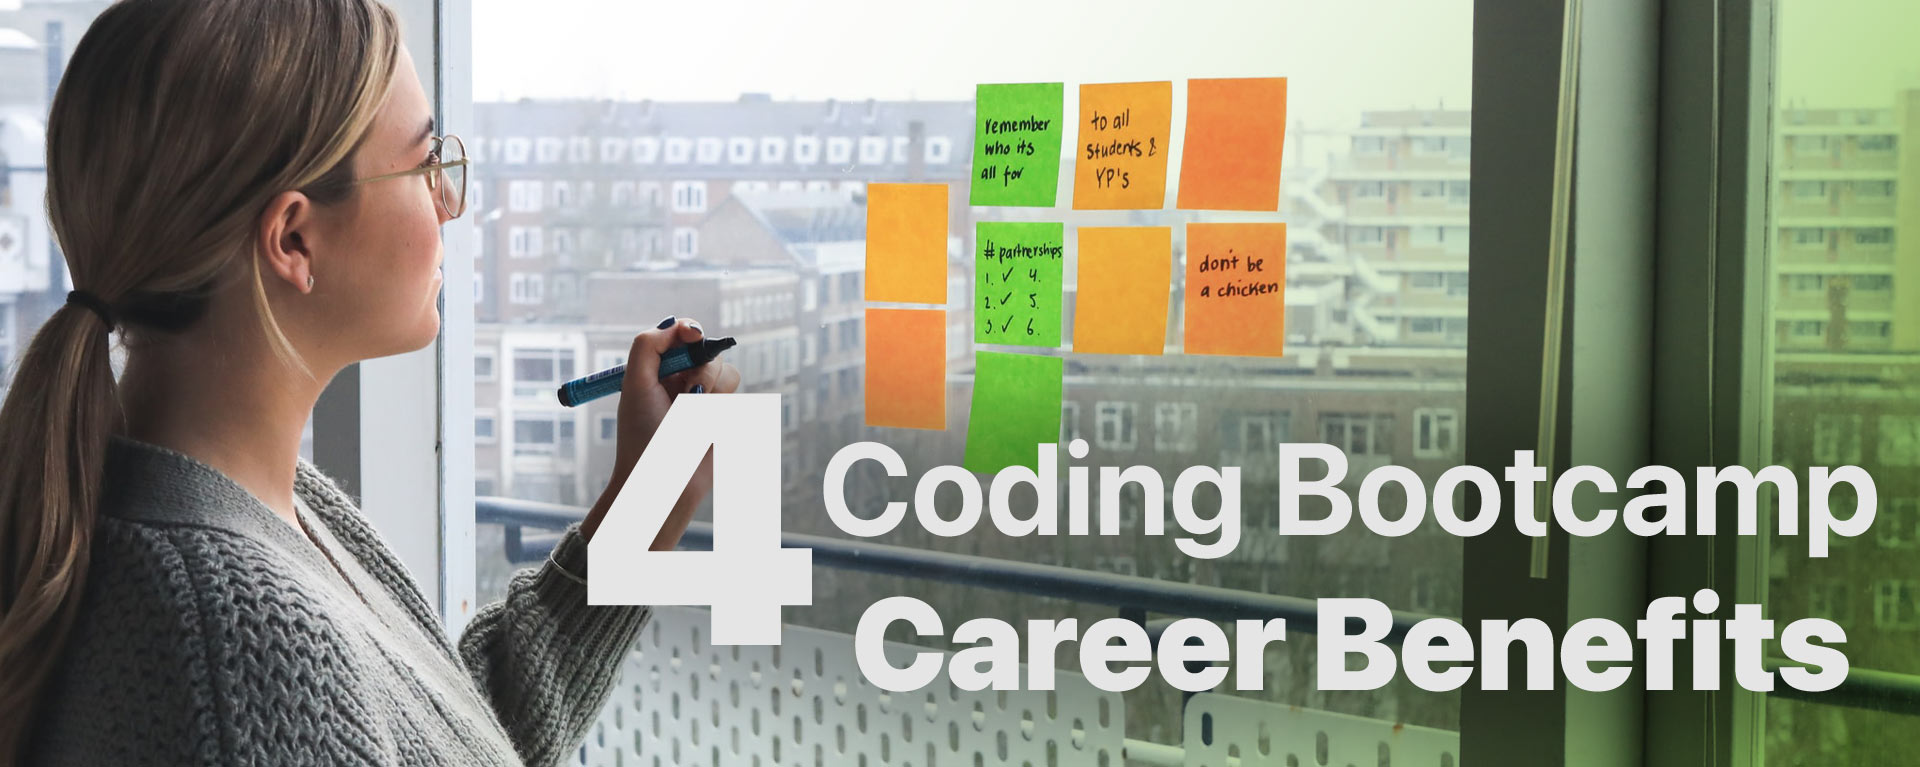 4 Coding Bootcamp Career Benefits Feature image